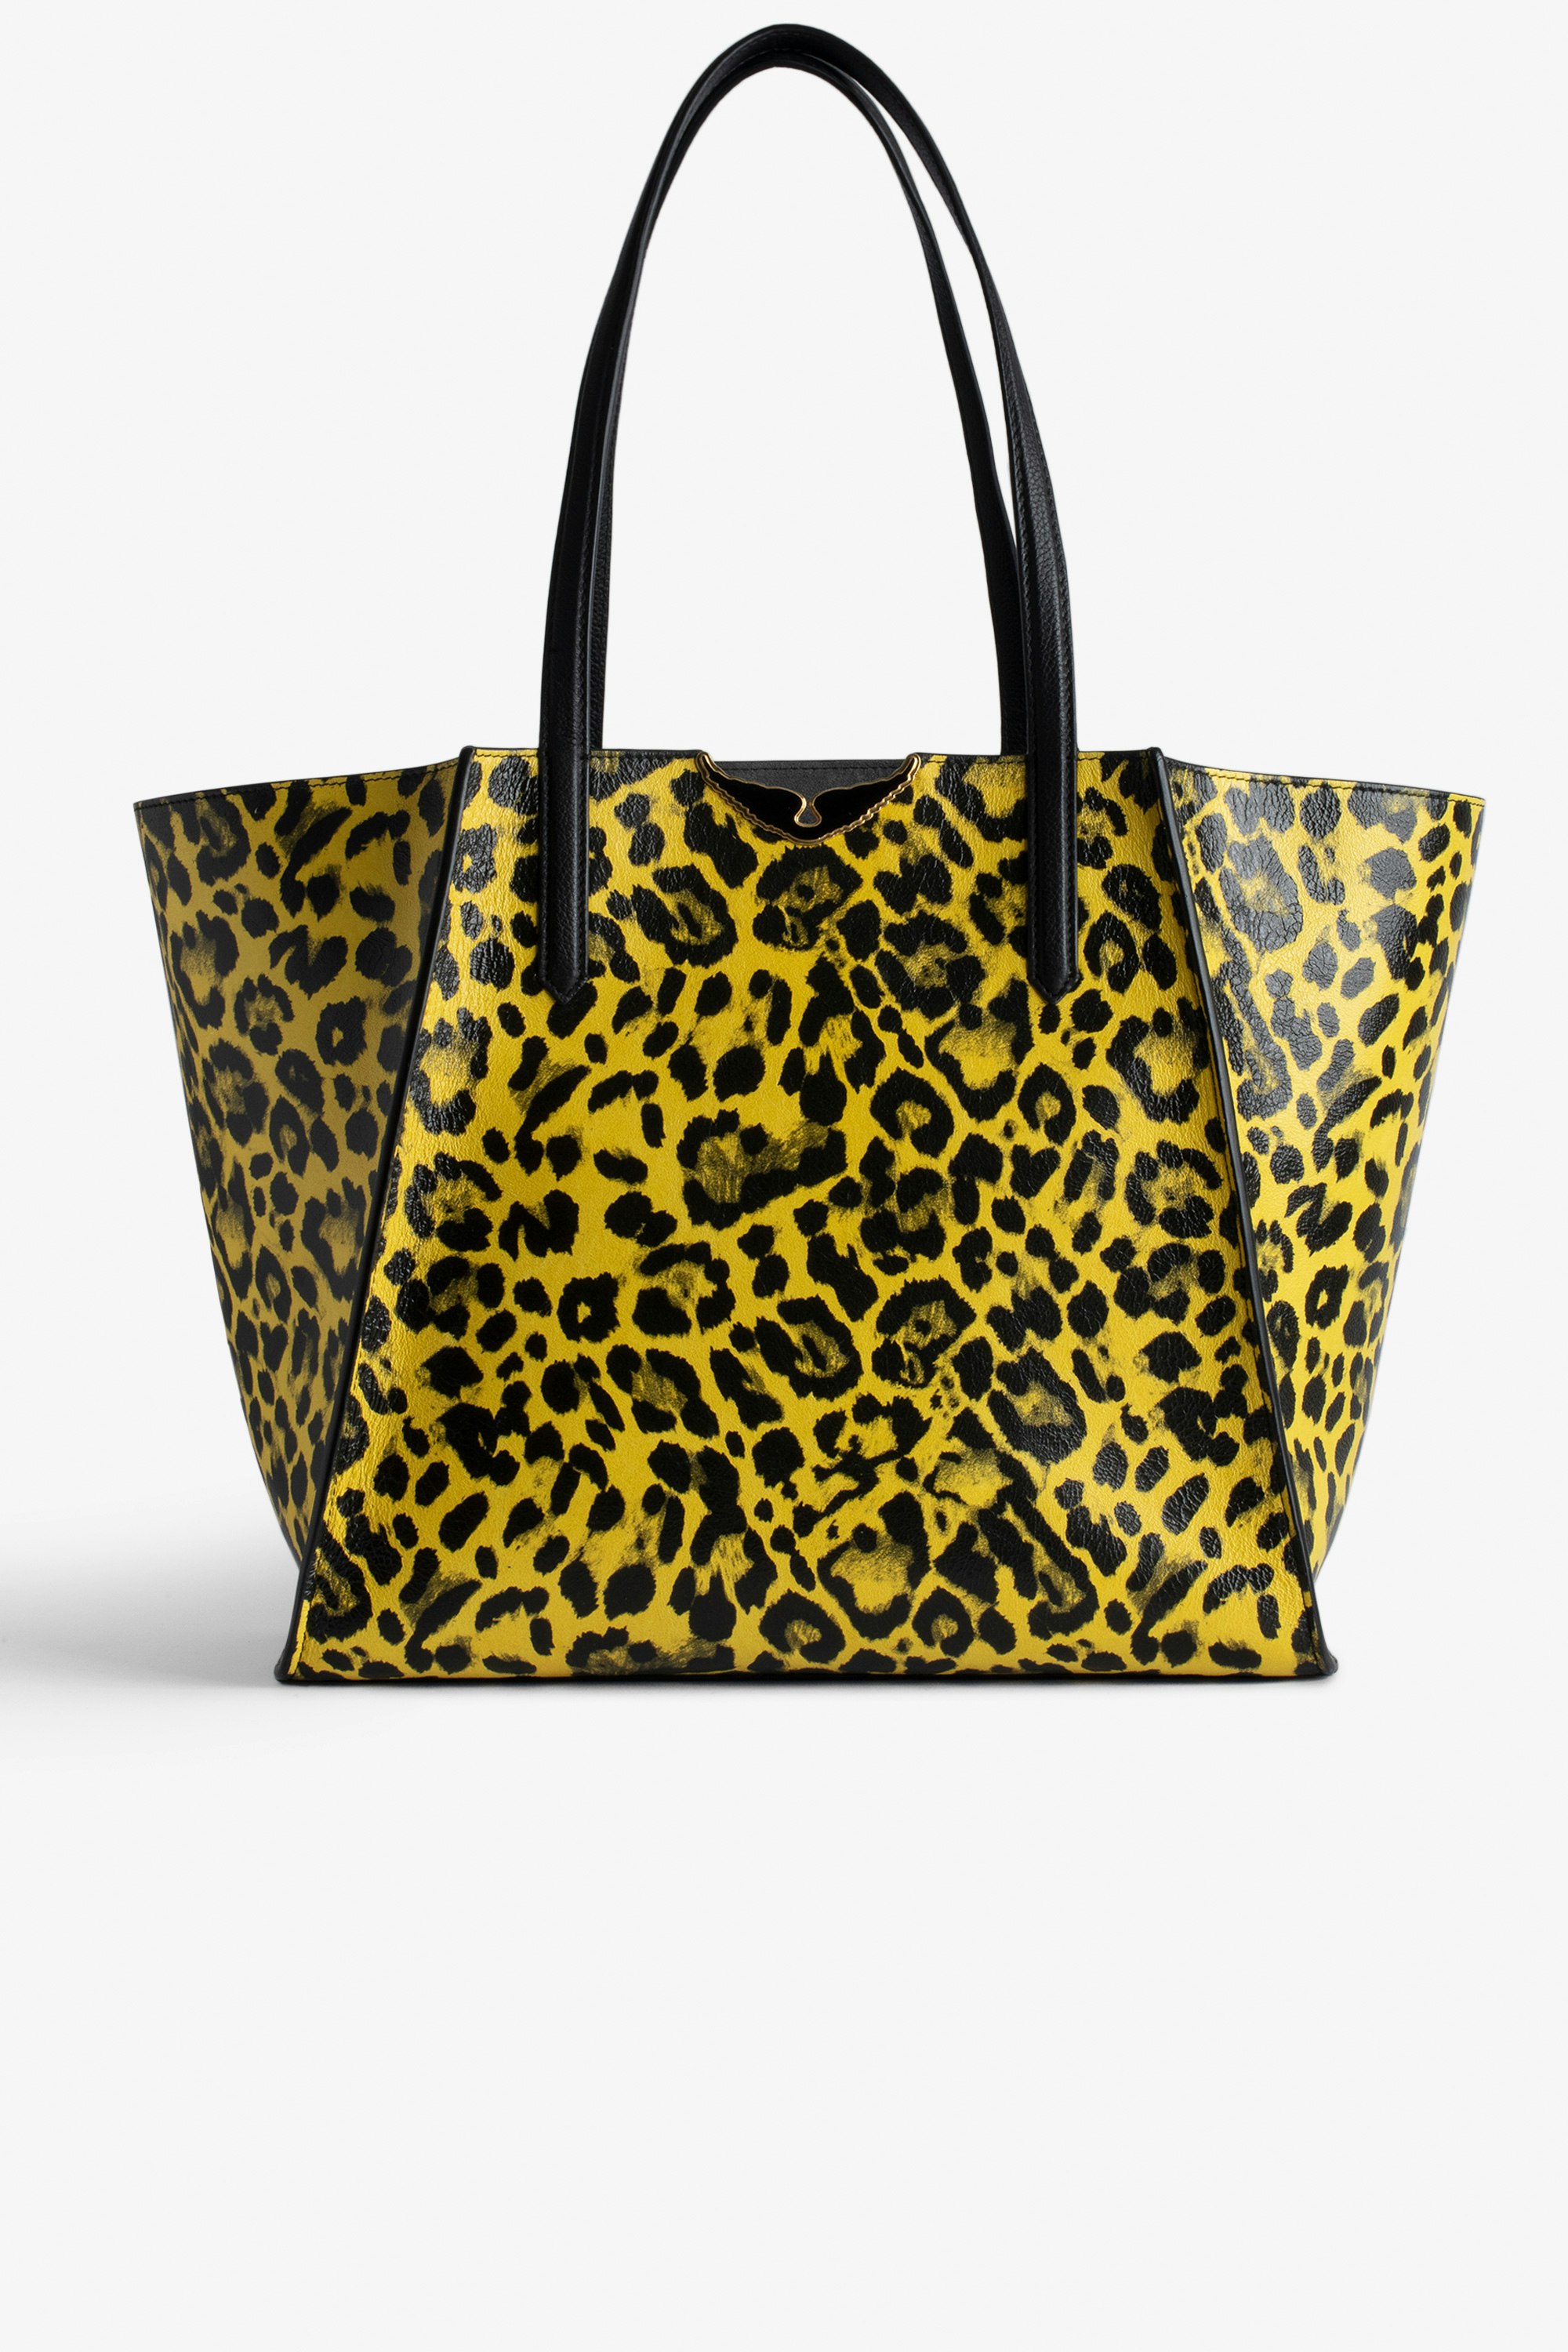 Le Borderline Leopard Bag - Women’s reversible tote bag in yellow leopard-print patent leather with handle and metal wings.